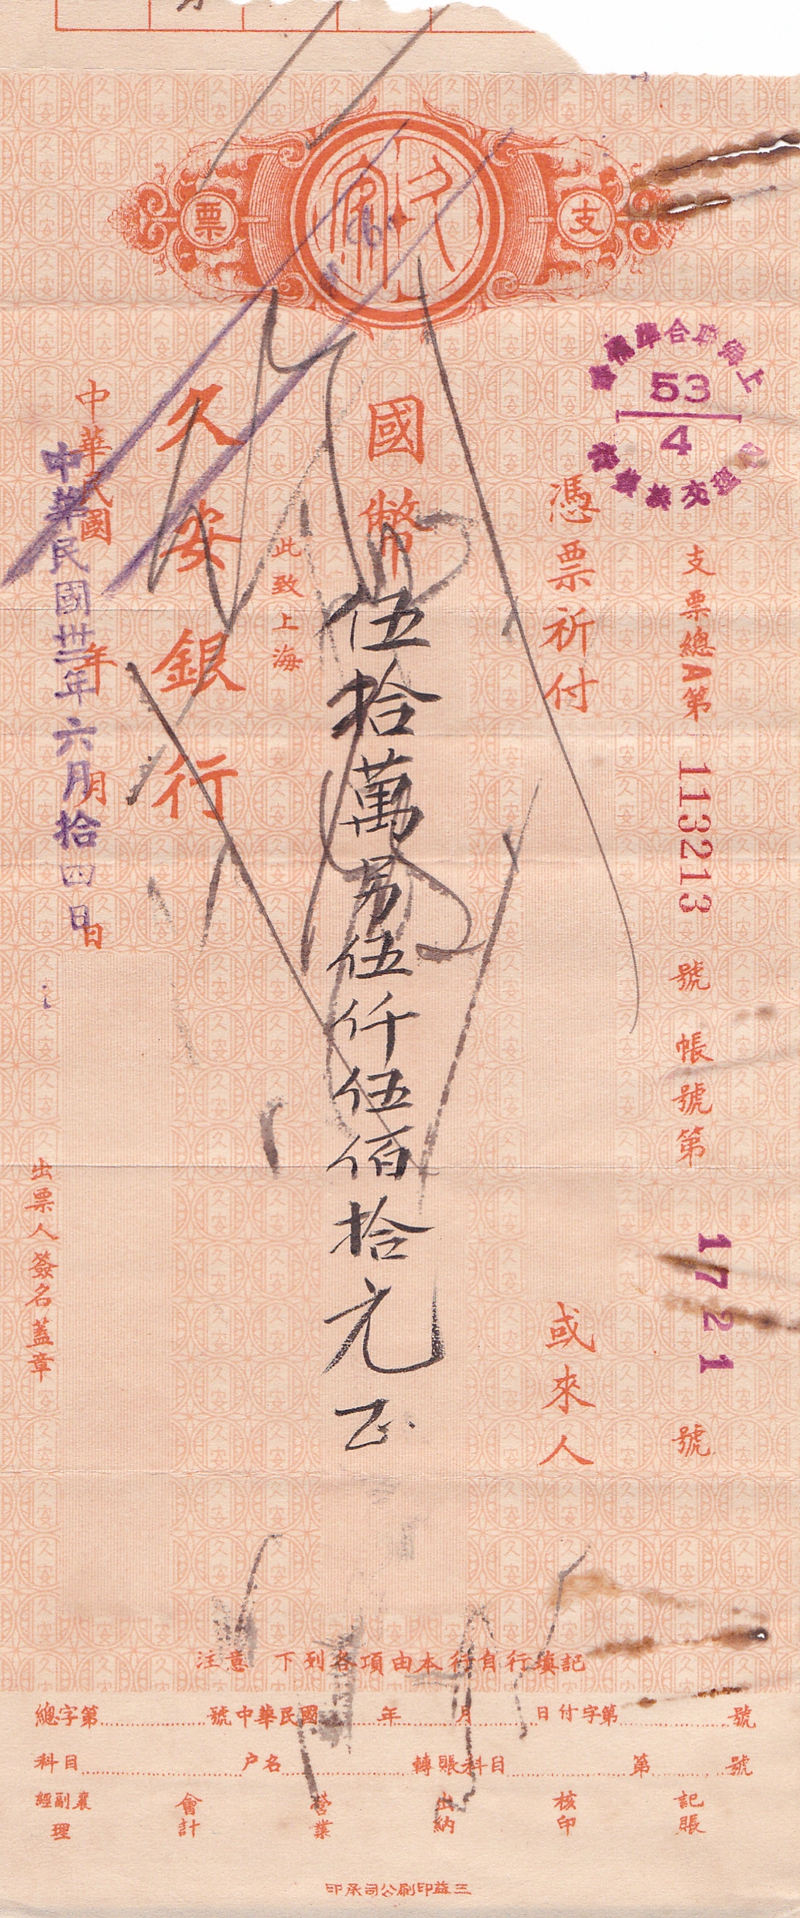 D1800, Check of China Longliving and Peace Bank, 1943, Shanghai Cheque